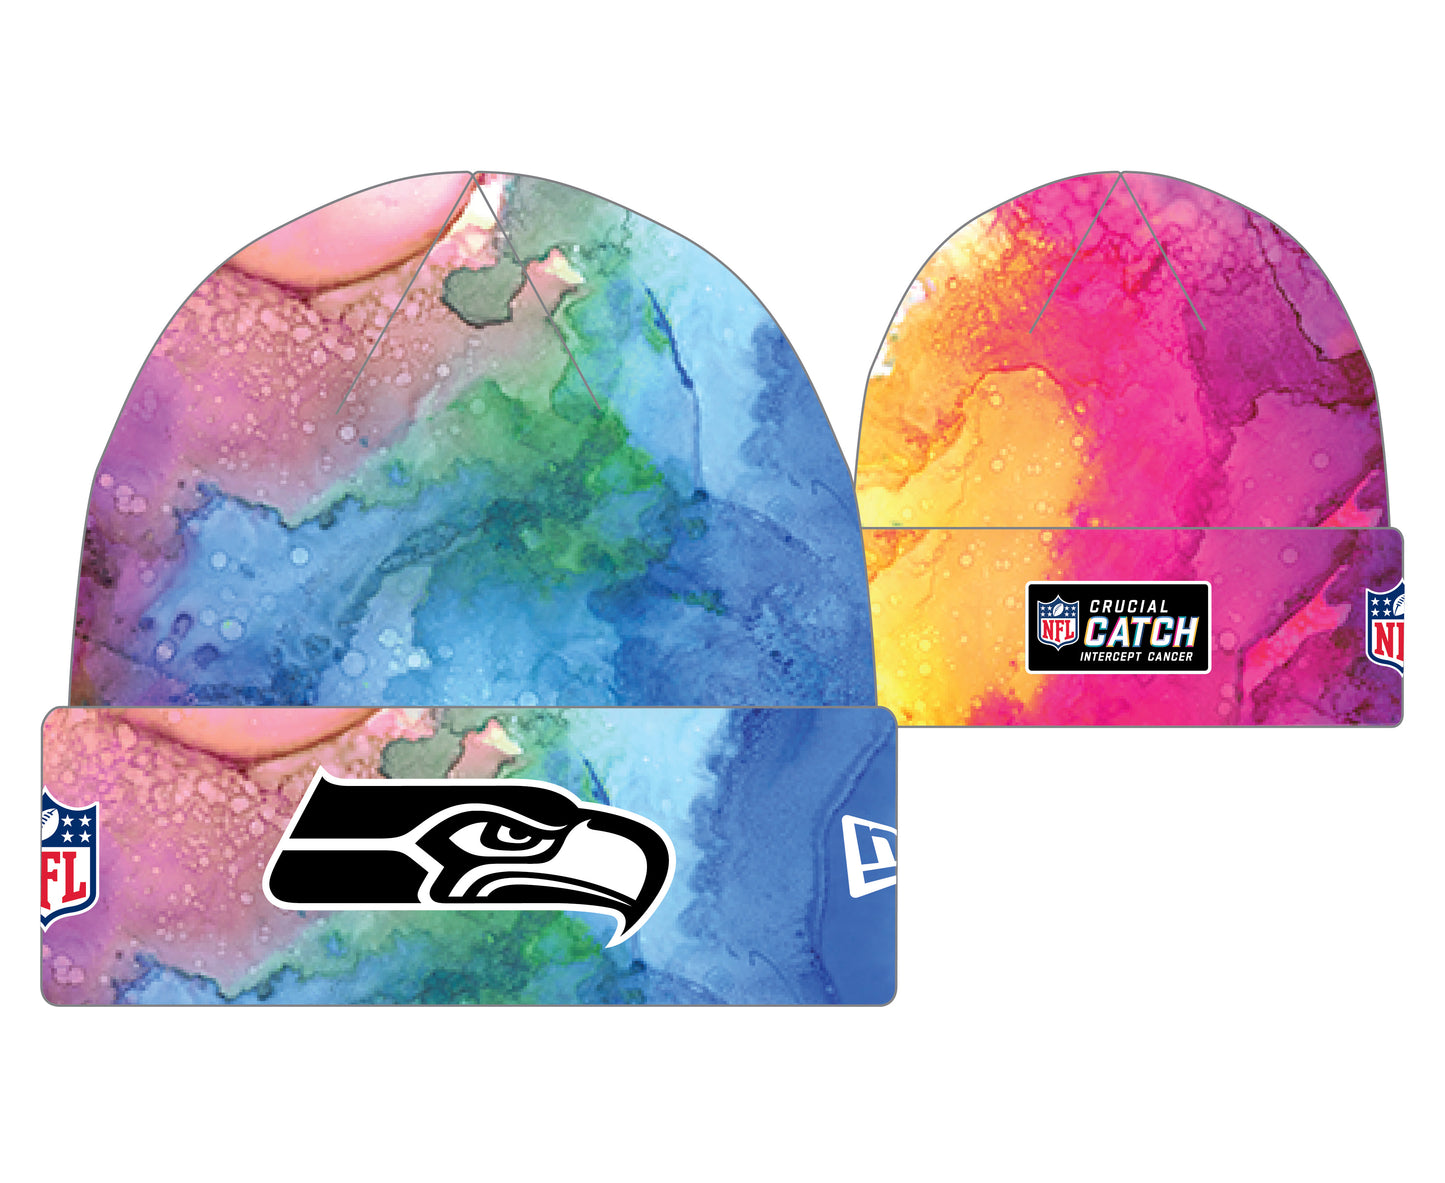 NFL Seattle Seahawks New Era Crucial Catch Knit Hat- Pink Ink